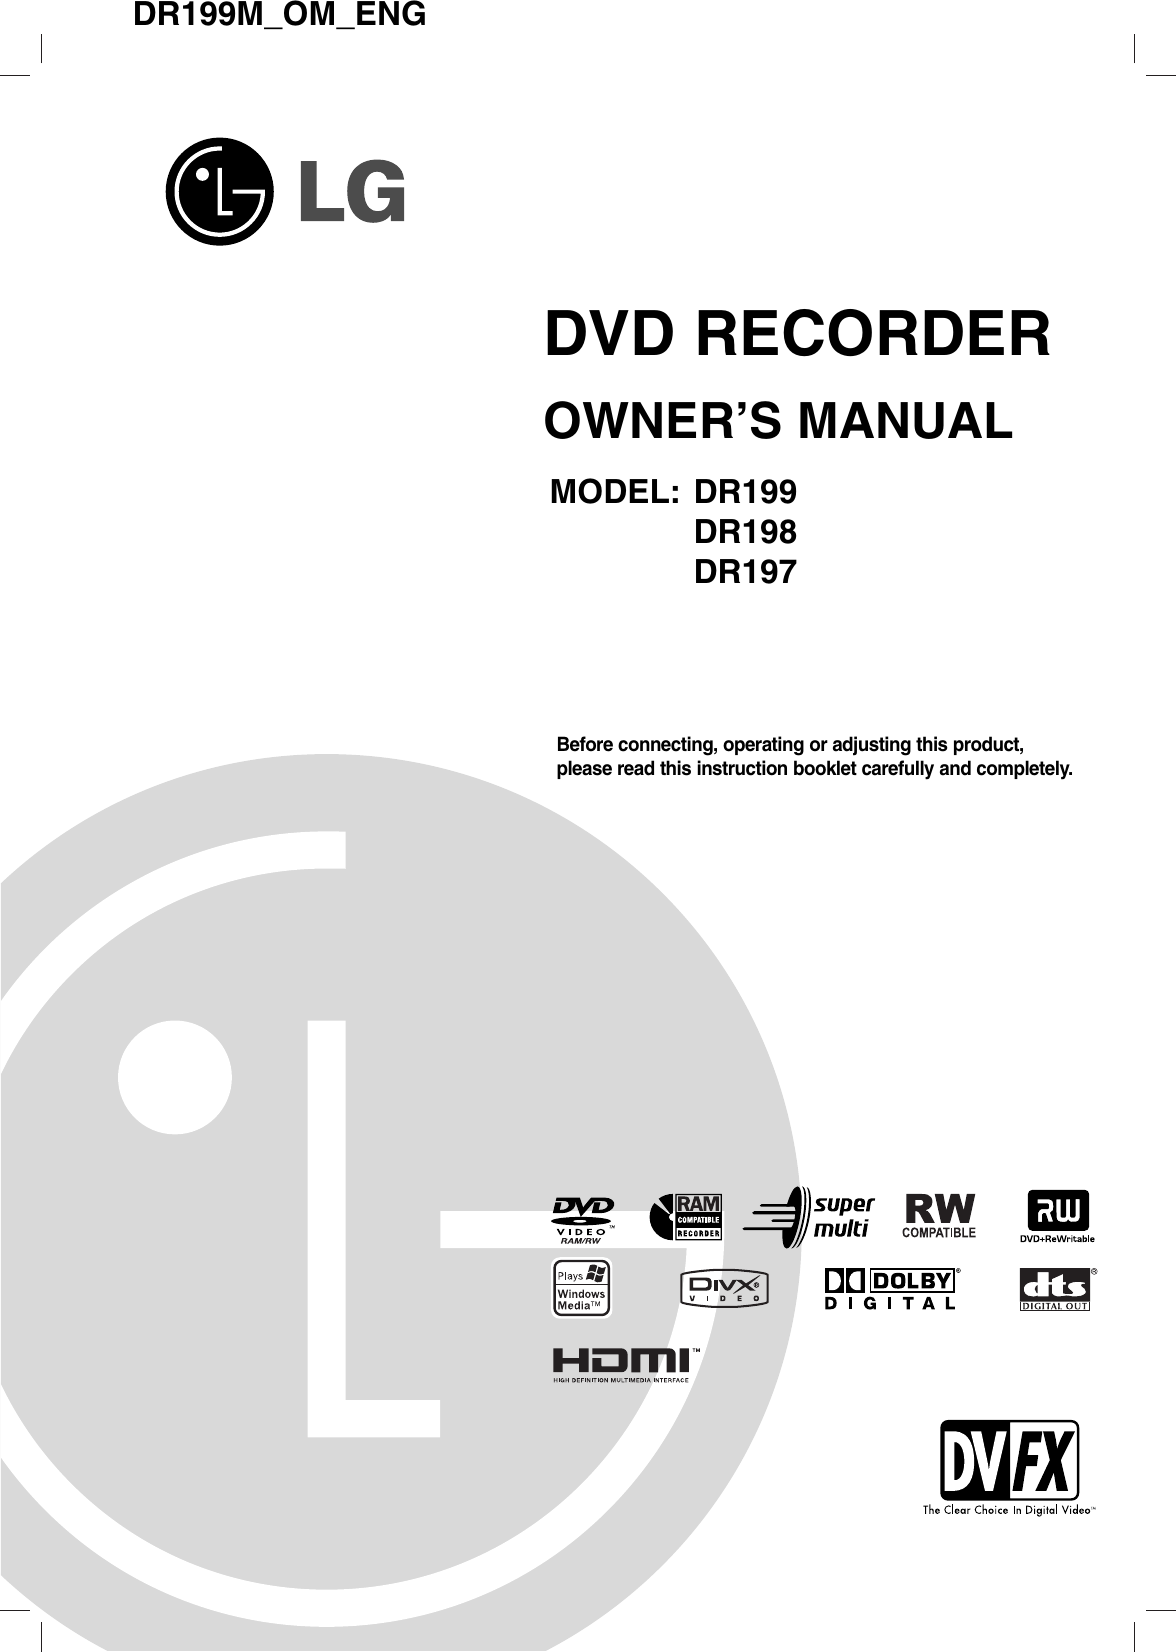 DR199M_OM_ENGDVD RECORDEROWNER’S MANUALMODEL: DR199DR198DR197Before connecting, operating or adjusting this product,please read this instruction booklet carefully and completely.